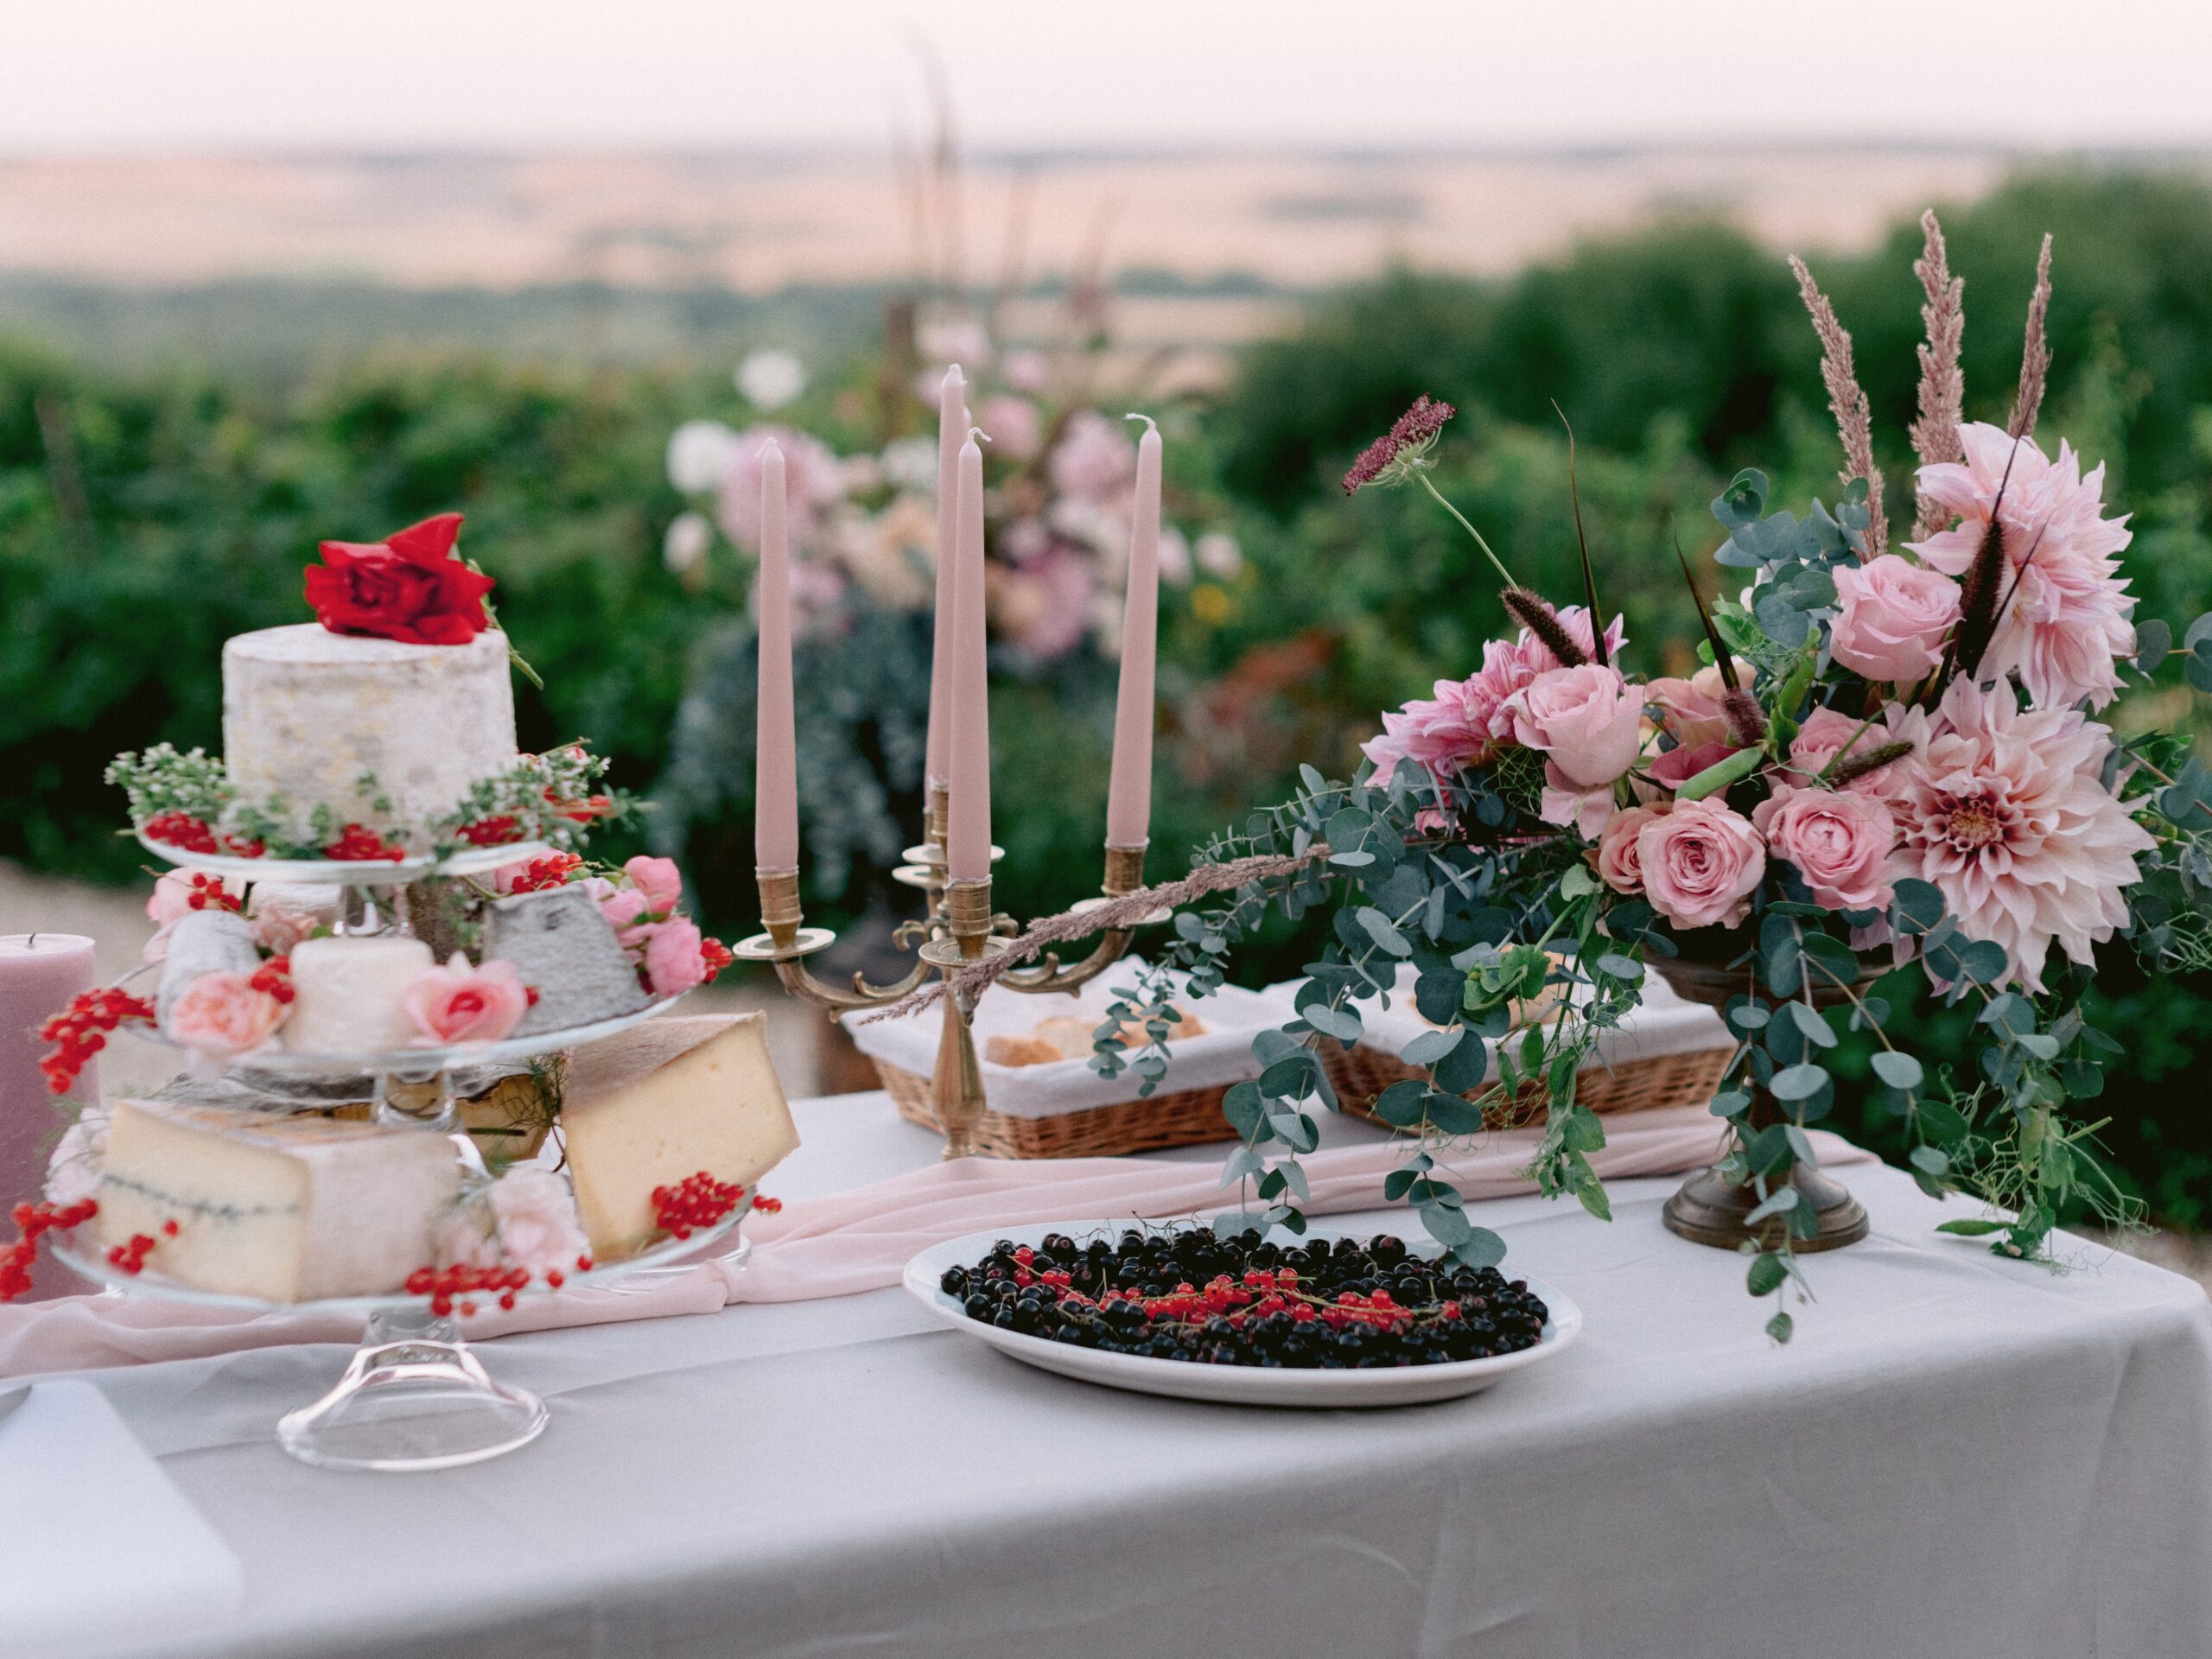 A sumptuous feast for a wedding at Chateau Du Fey. Image by Jenny Fu Studio